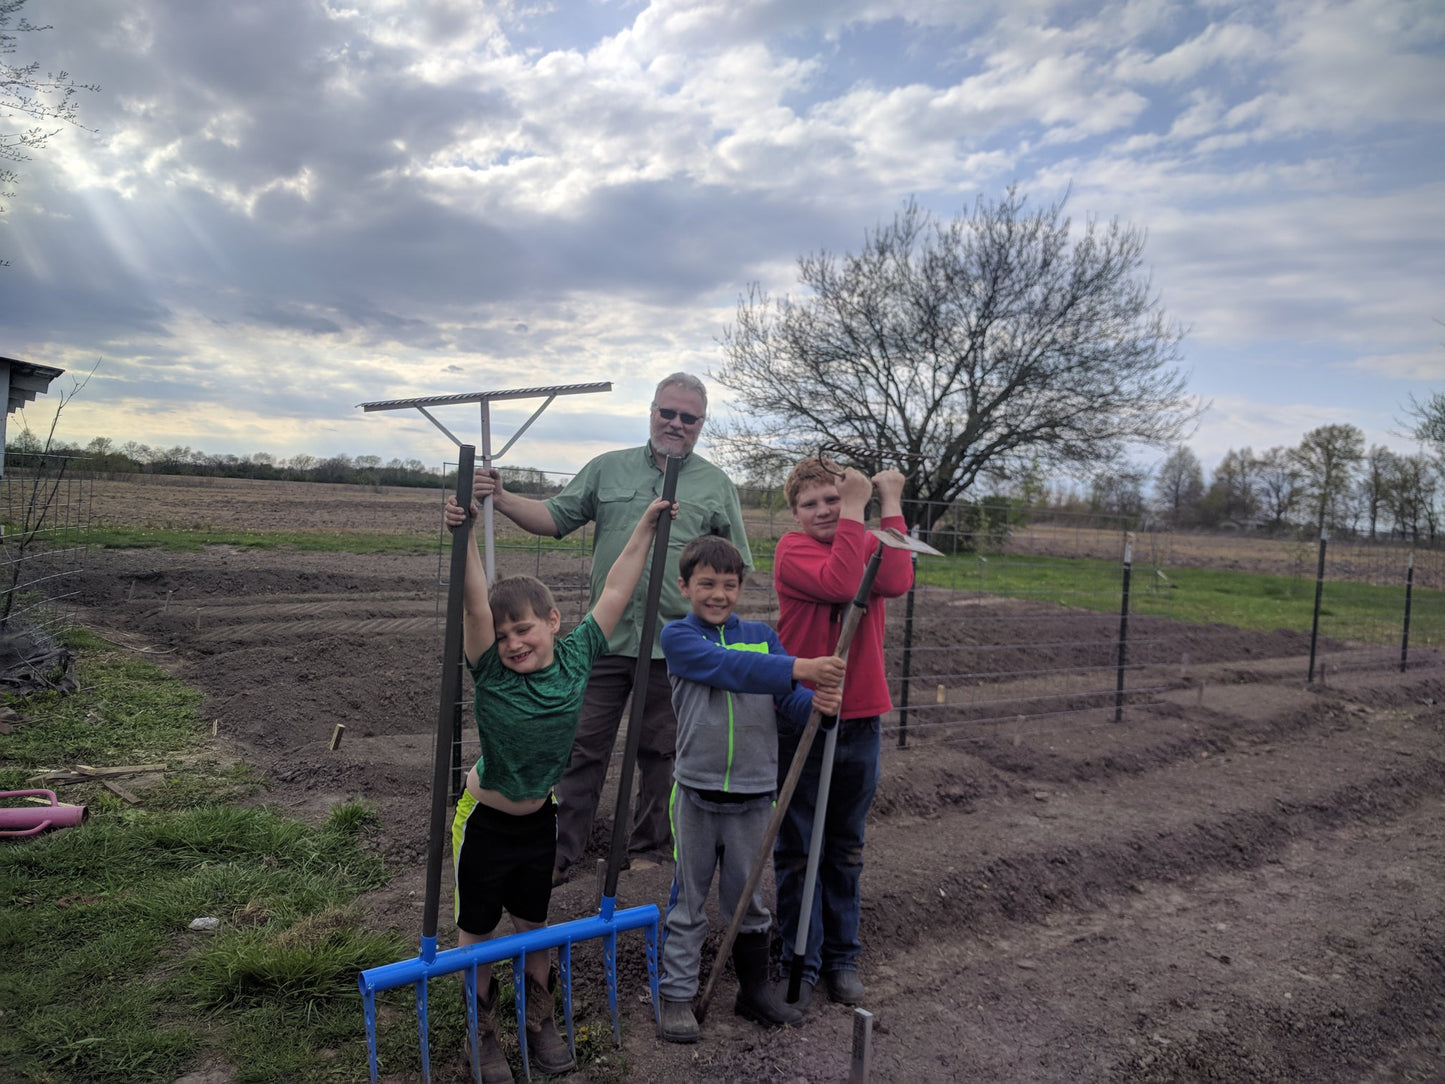 Teamwork makes the dreamwork when it comes to farming and gardening, this dream team is using a Market Gardener Treadlite Broadfork to cultivate and promote soil health